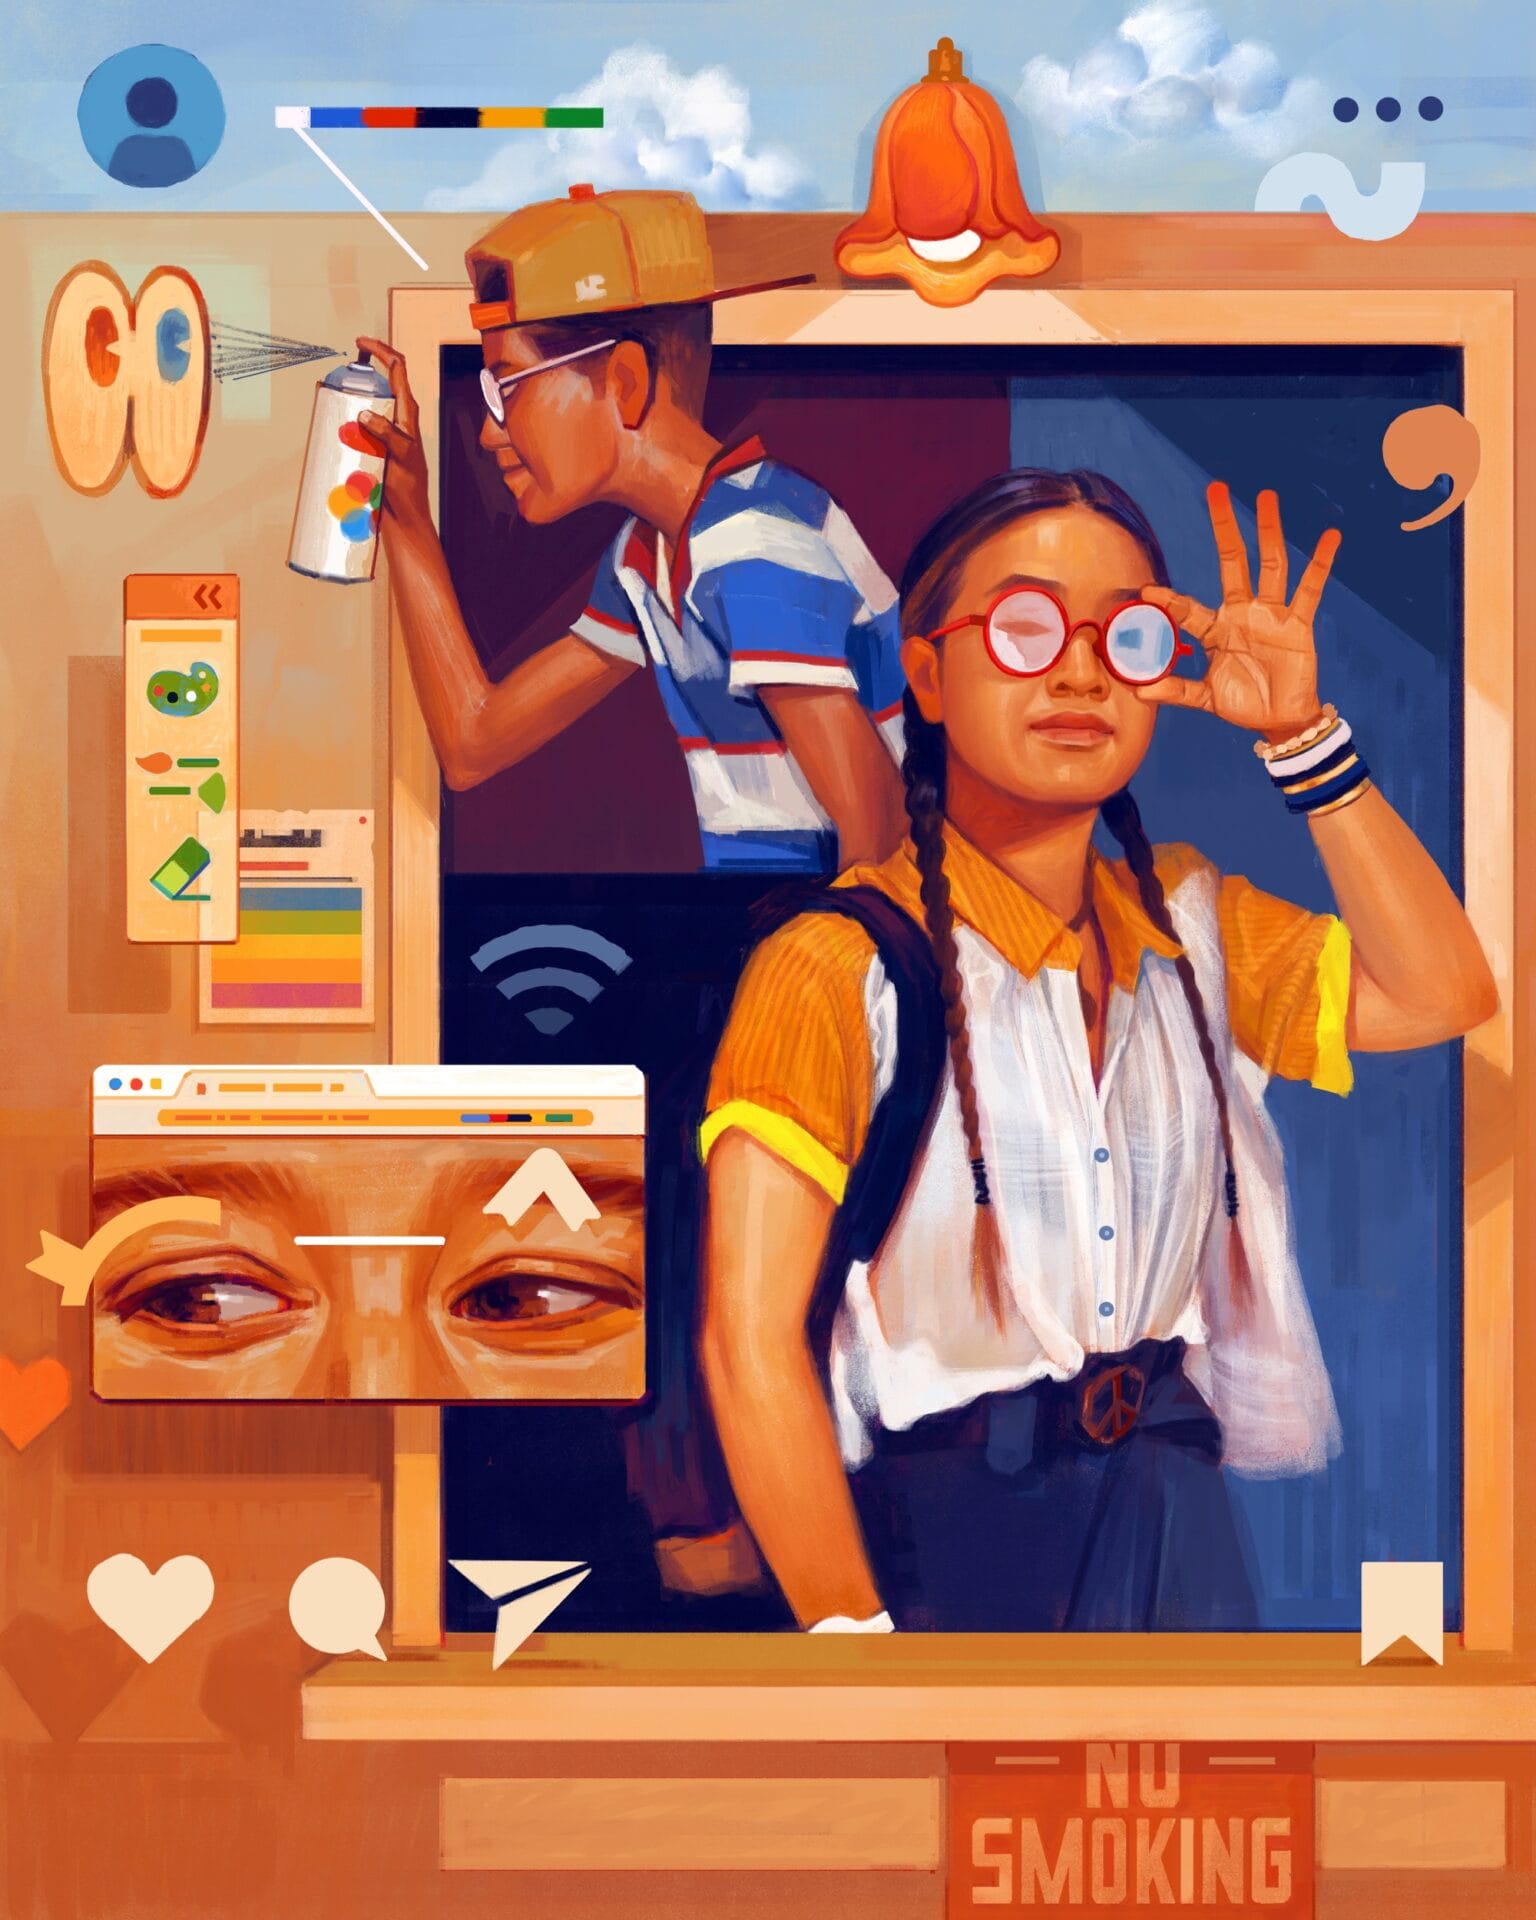 a girl with braids and a backpack touches her glasses while another kid in the background spraypaints two large eyes. small icons like hearts and quotes surround them